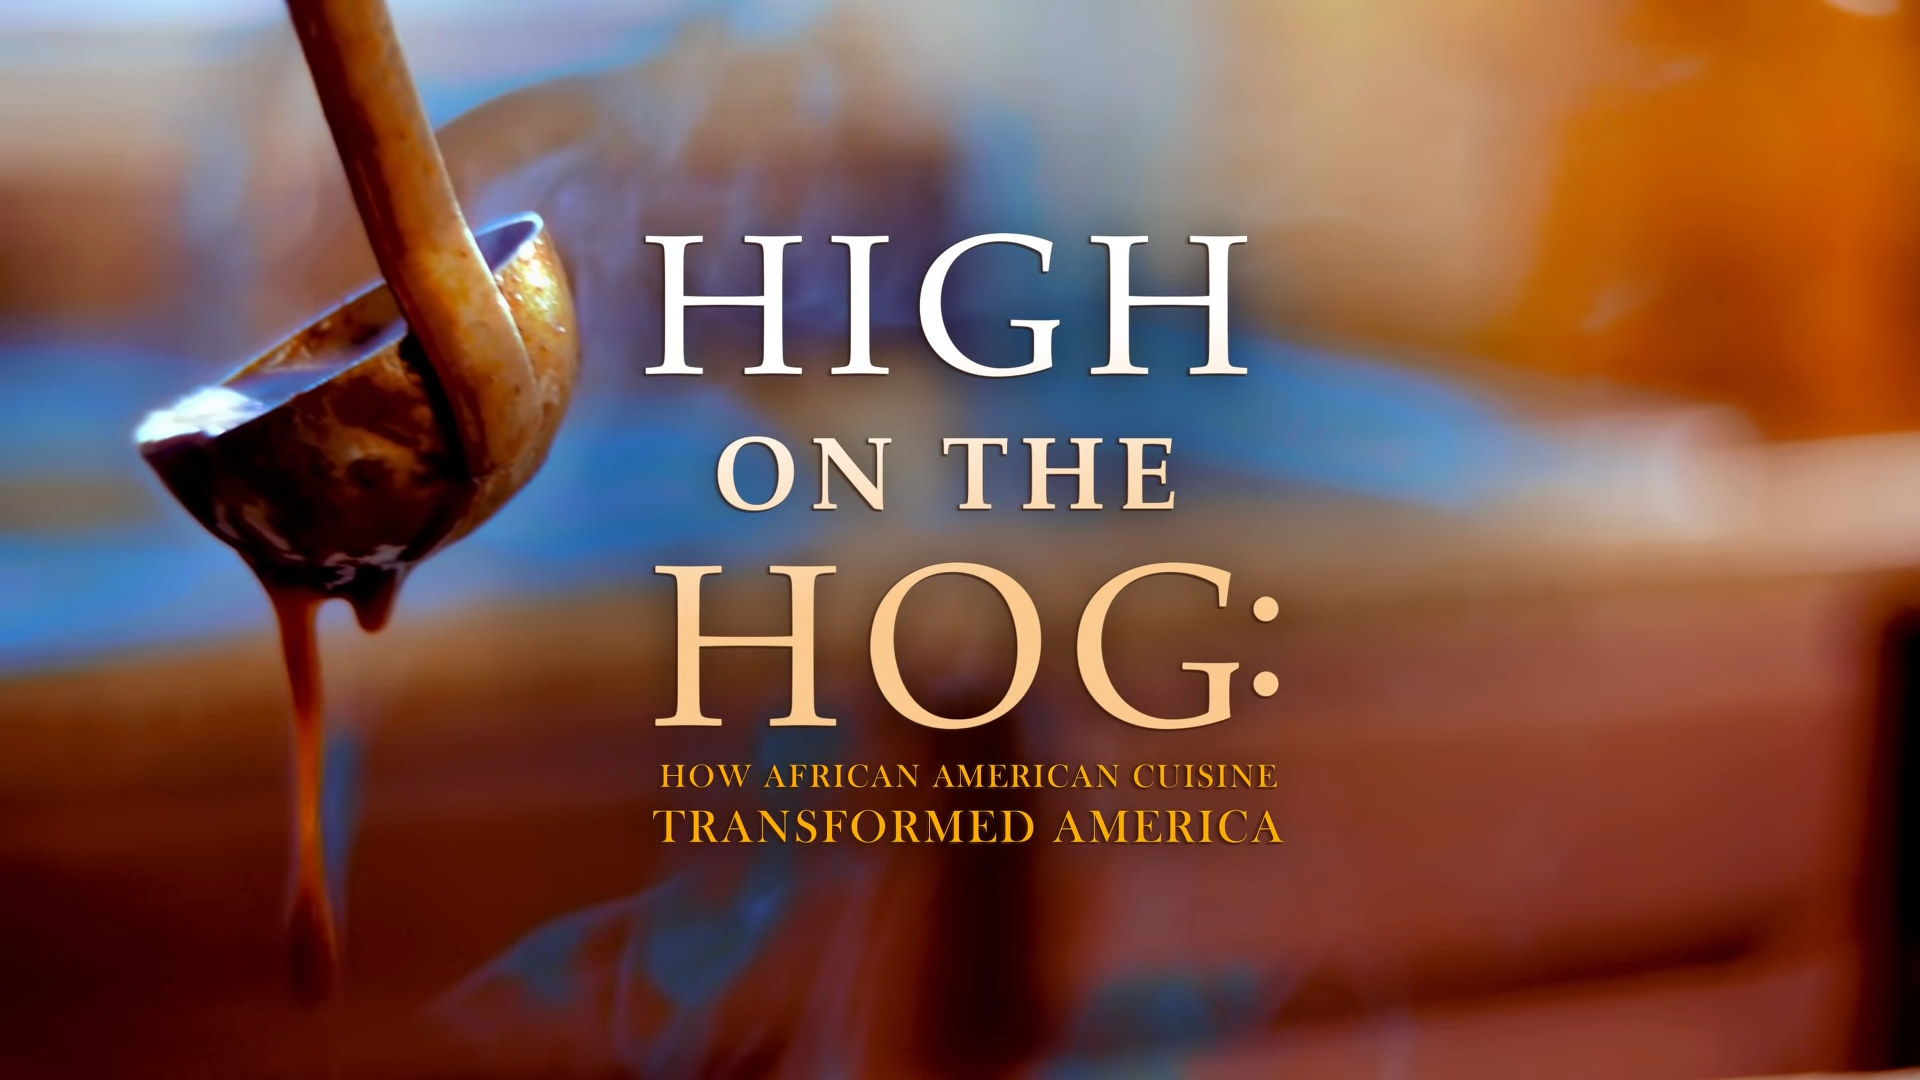 Title image for High on the Hog with ladle in background.